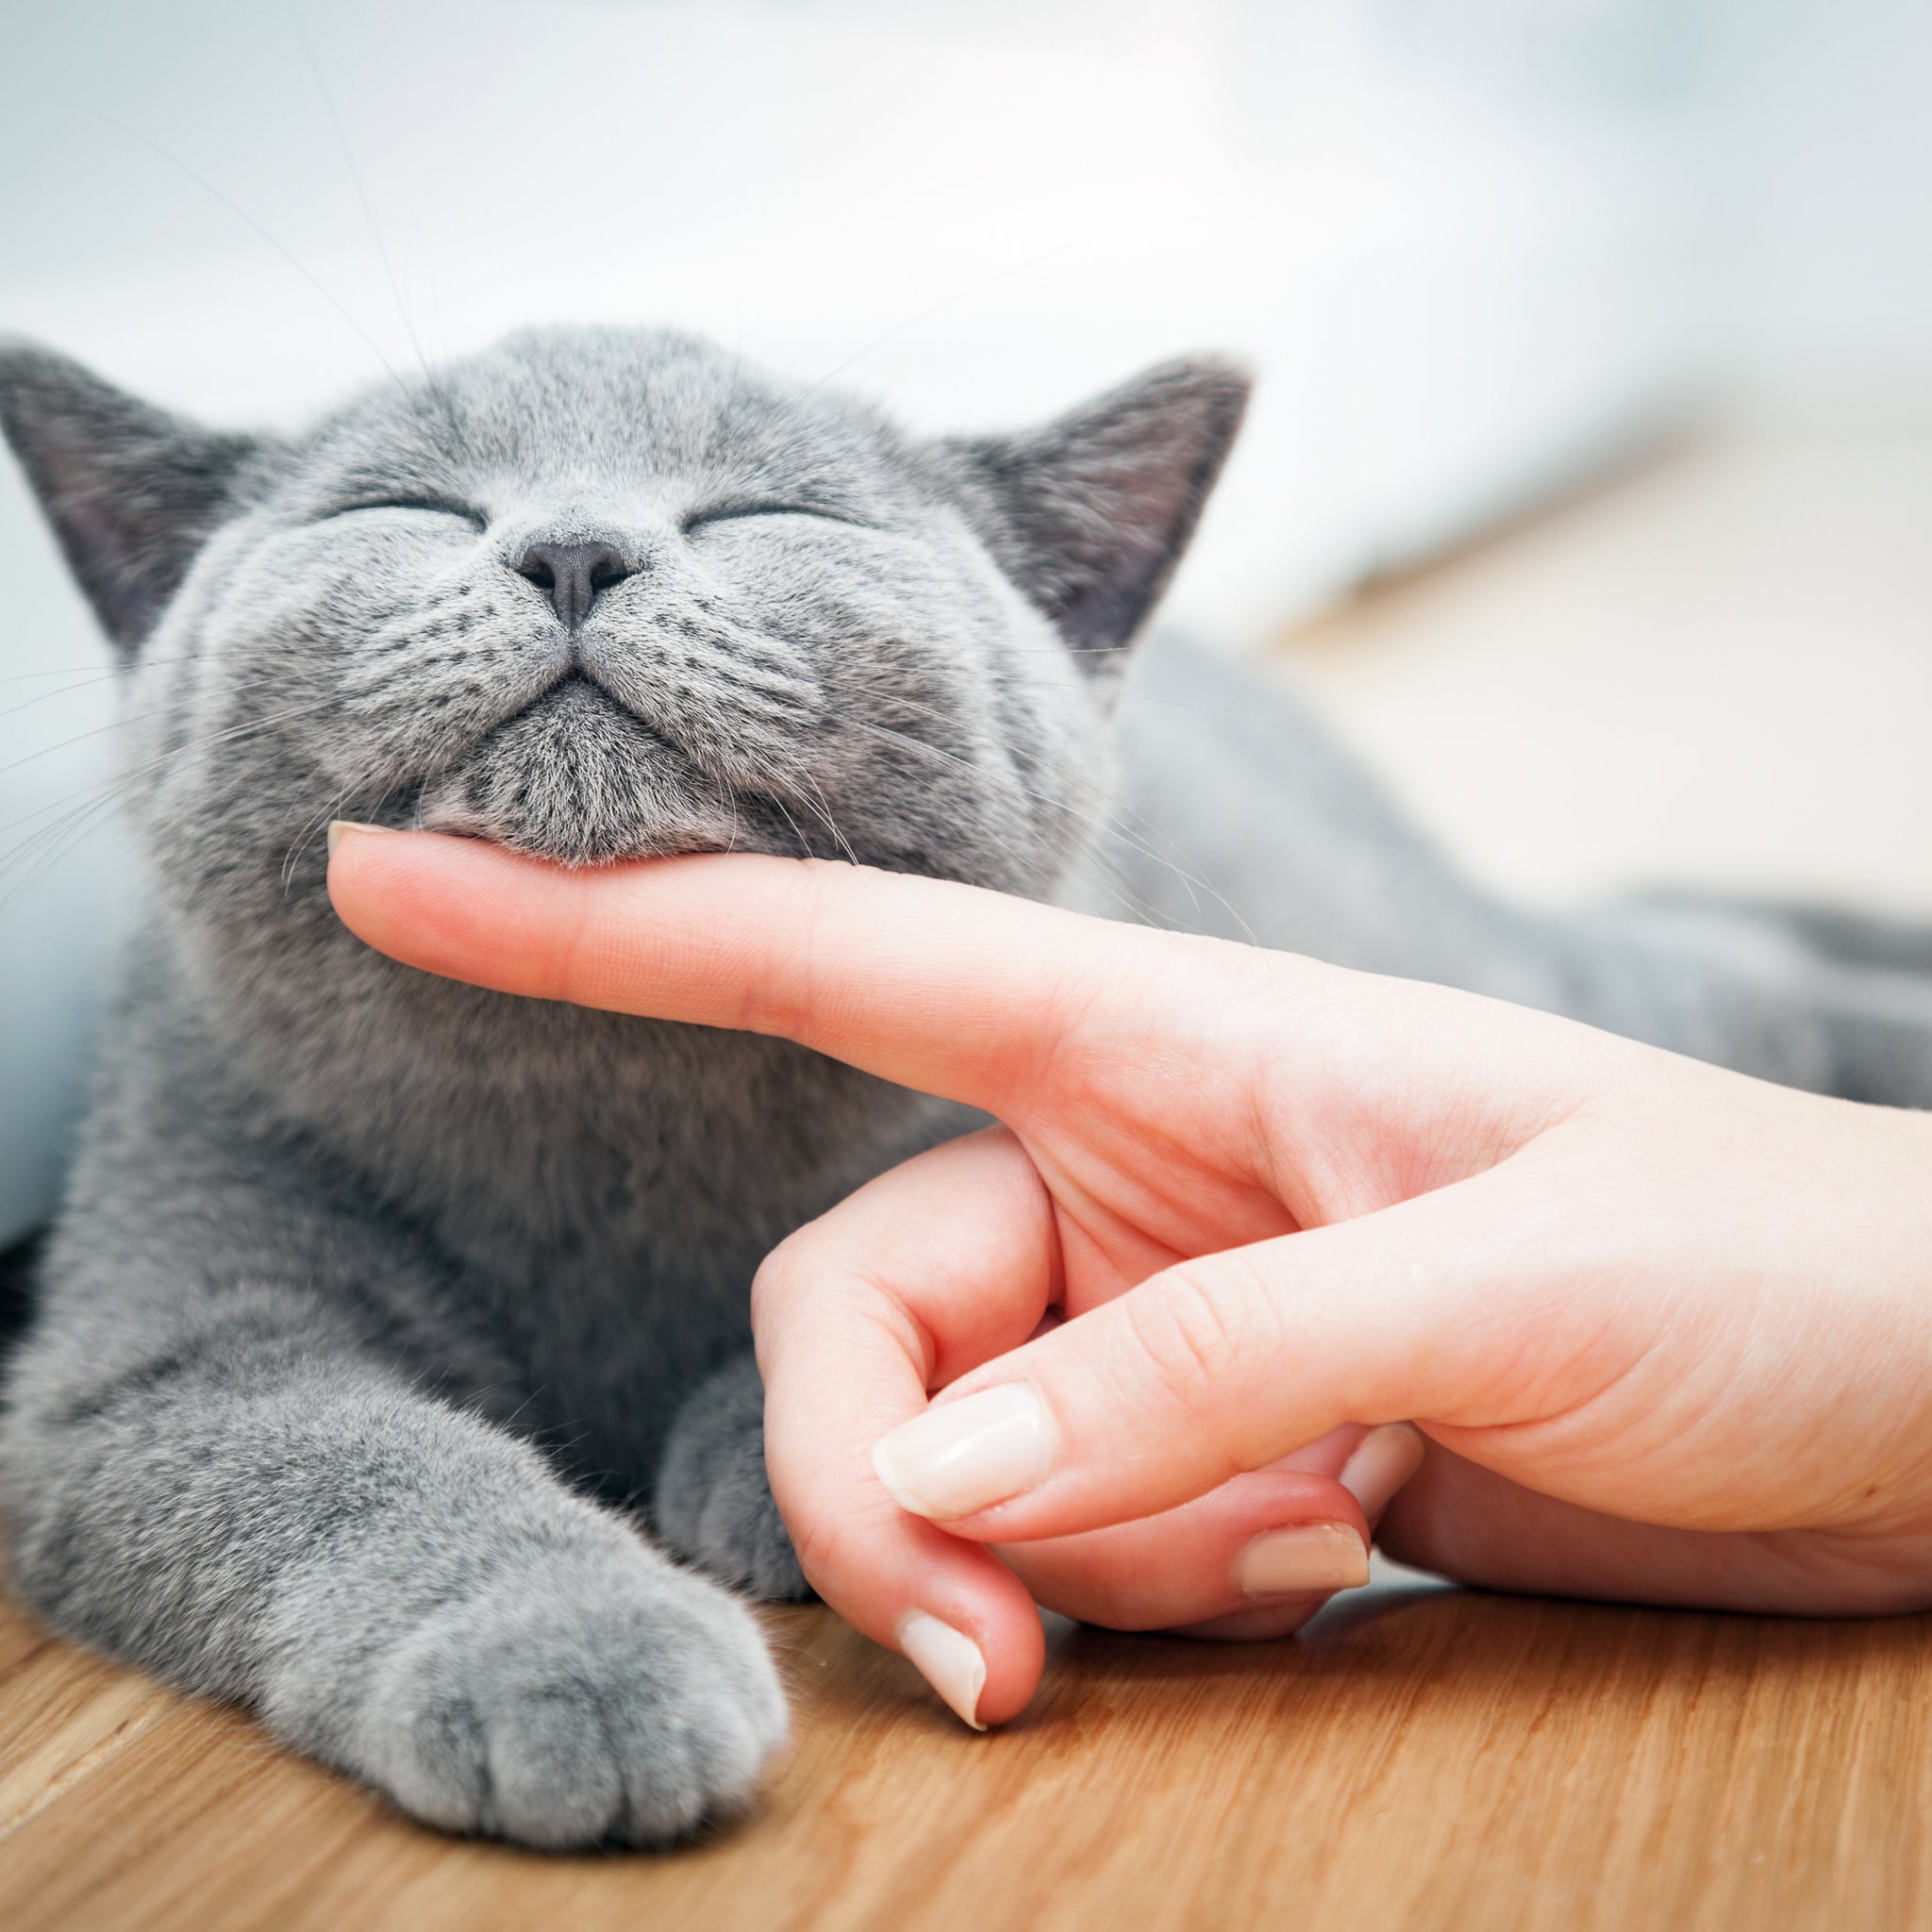 How to build a good relationship with your cats?